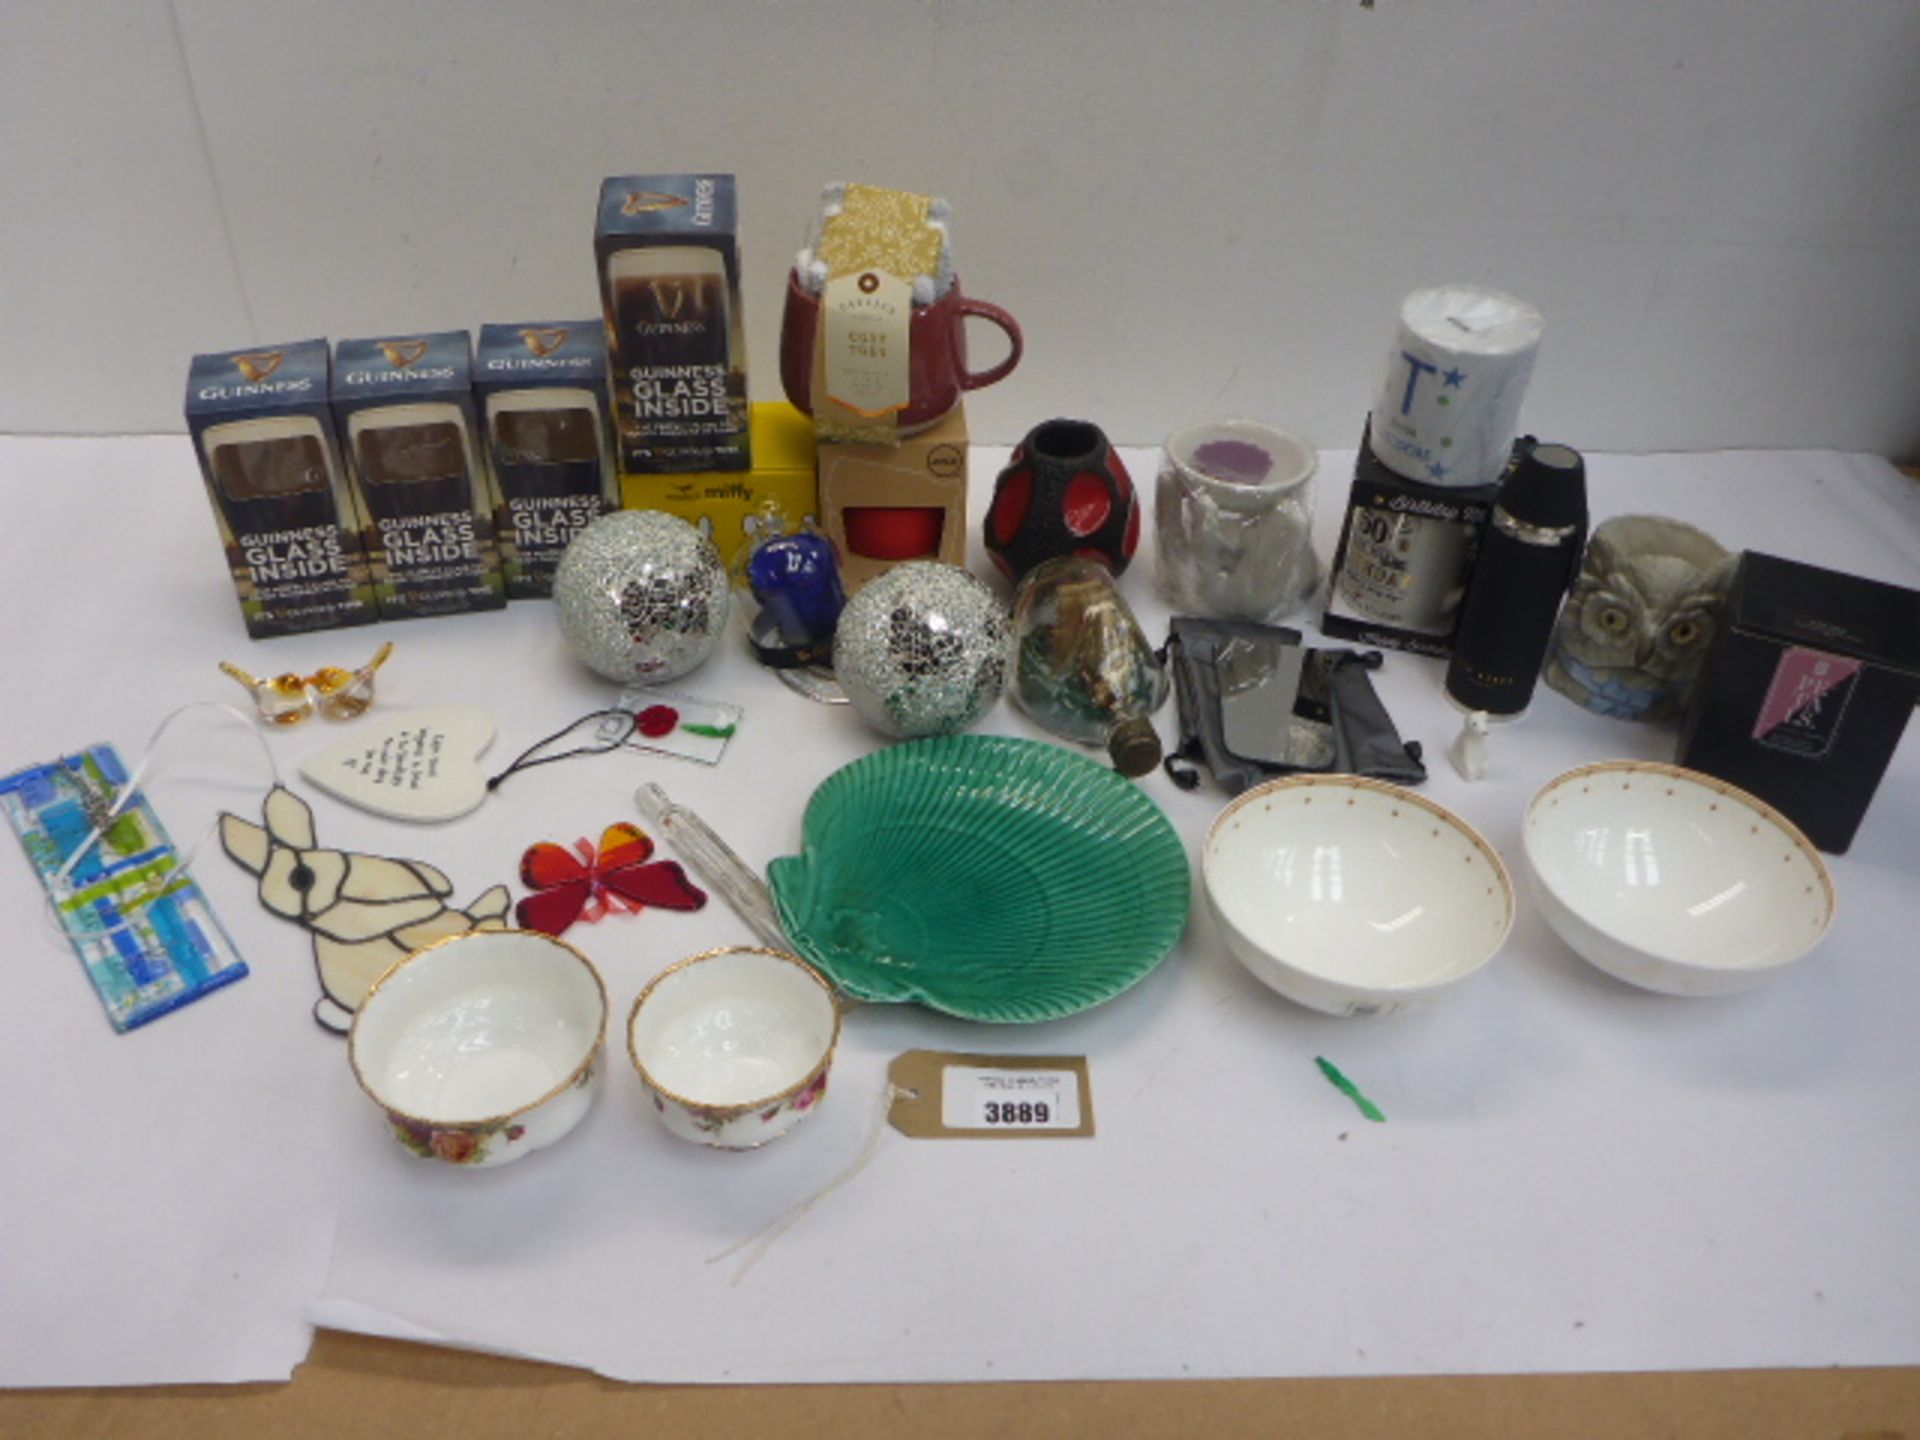 Box containing Wedgwood plate, Royal Albert dishes, Guinness glasses, novelty mugs, window sun